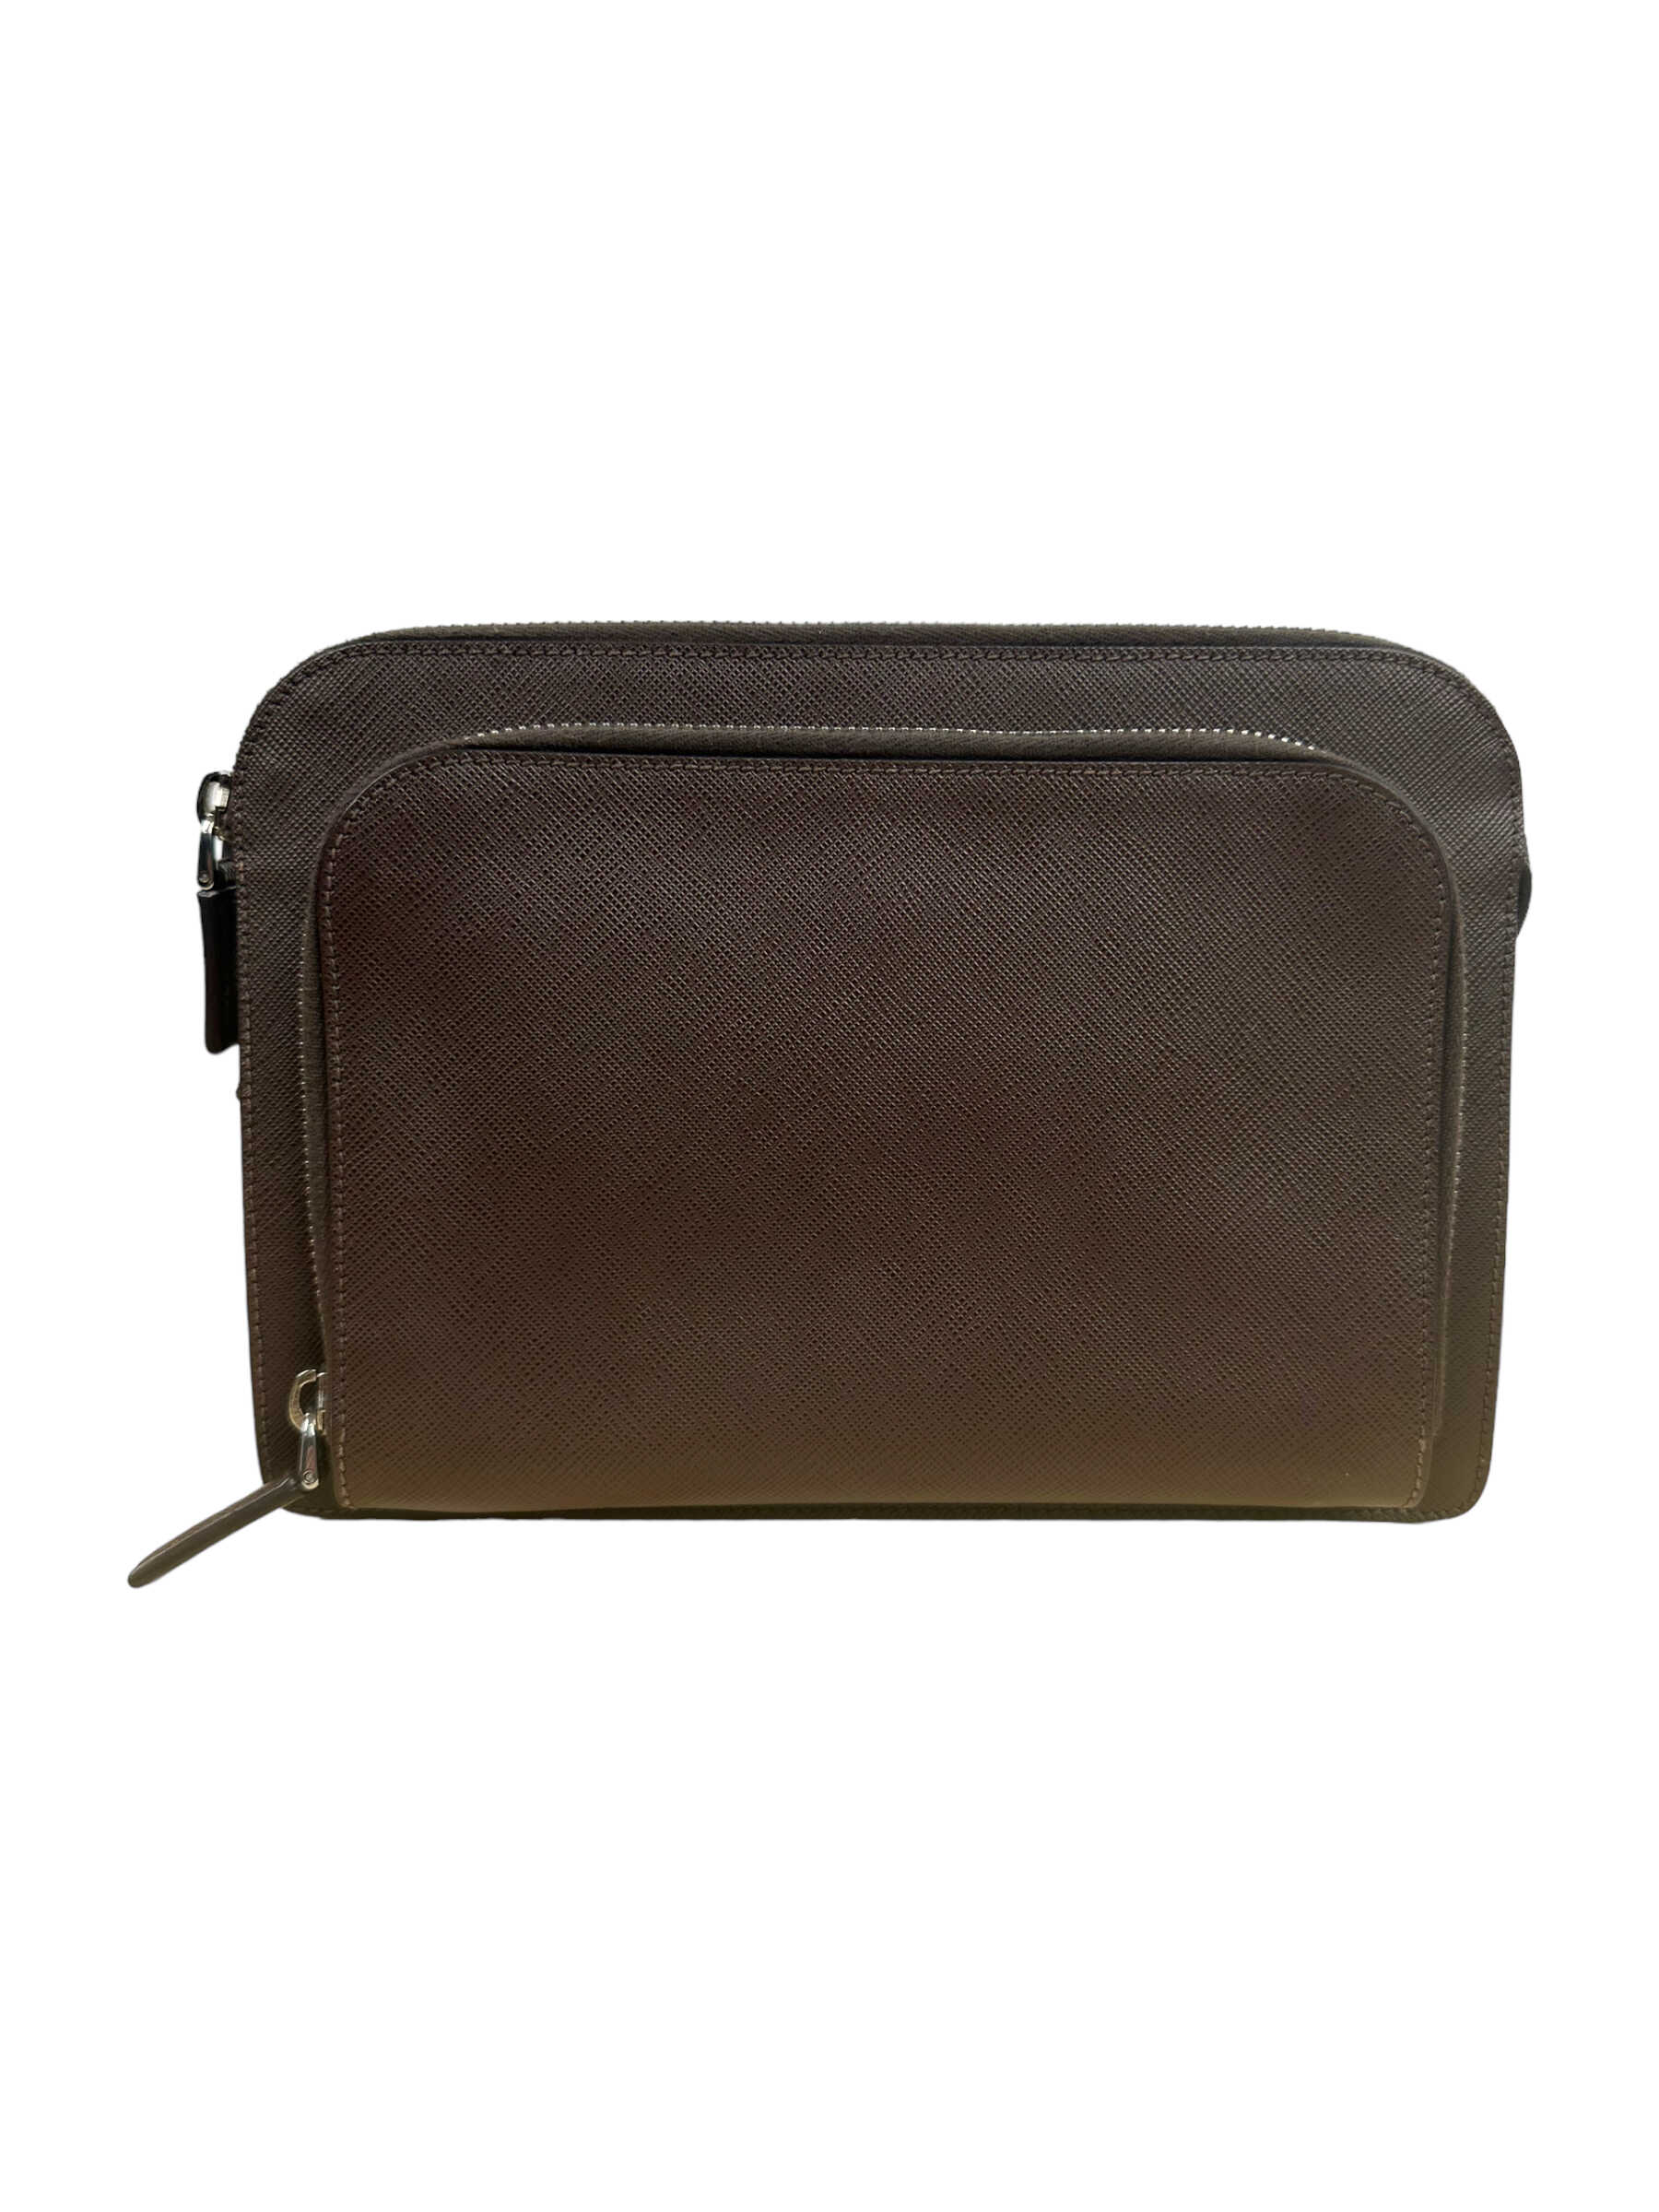 Prada Dark Brown Leather Clutch with Wrist Strap — Genuine Design Luxury Consignment for Men. New & Pre-Owned Clothing, Shoes, & Accessories. Calgary, Canada